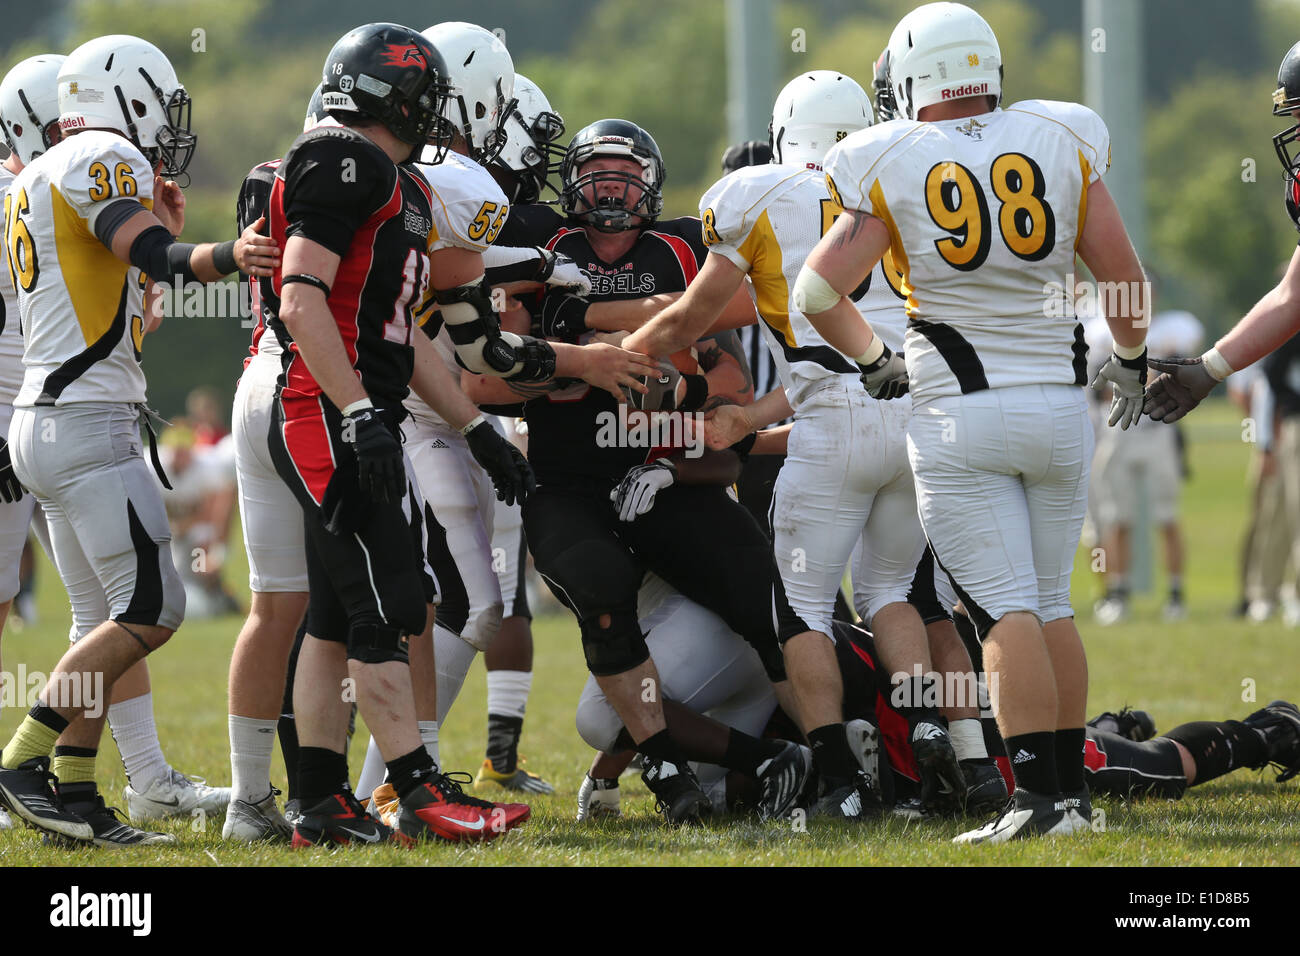 Image from the international challenge American Football game between